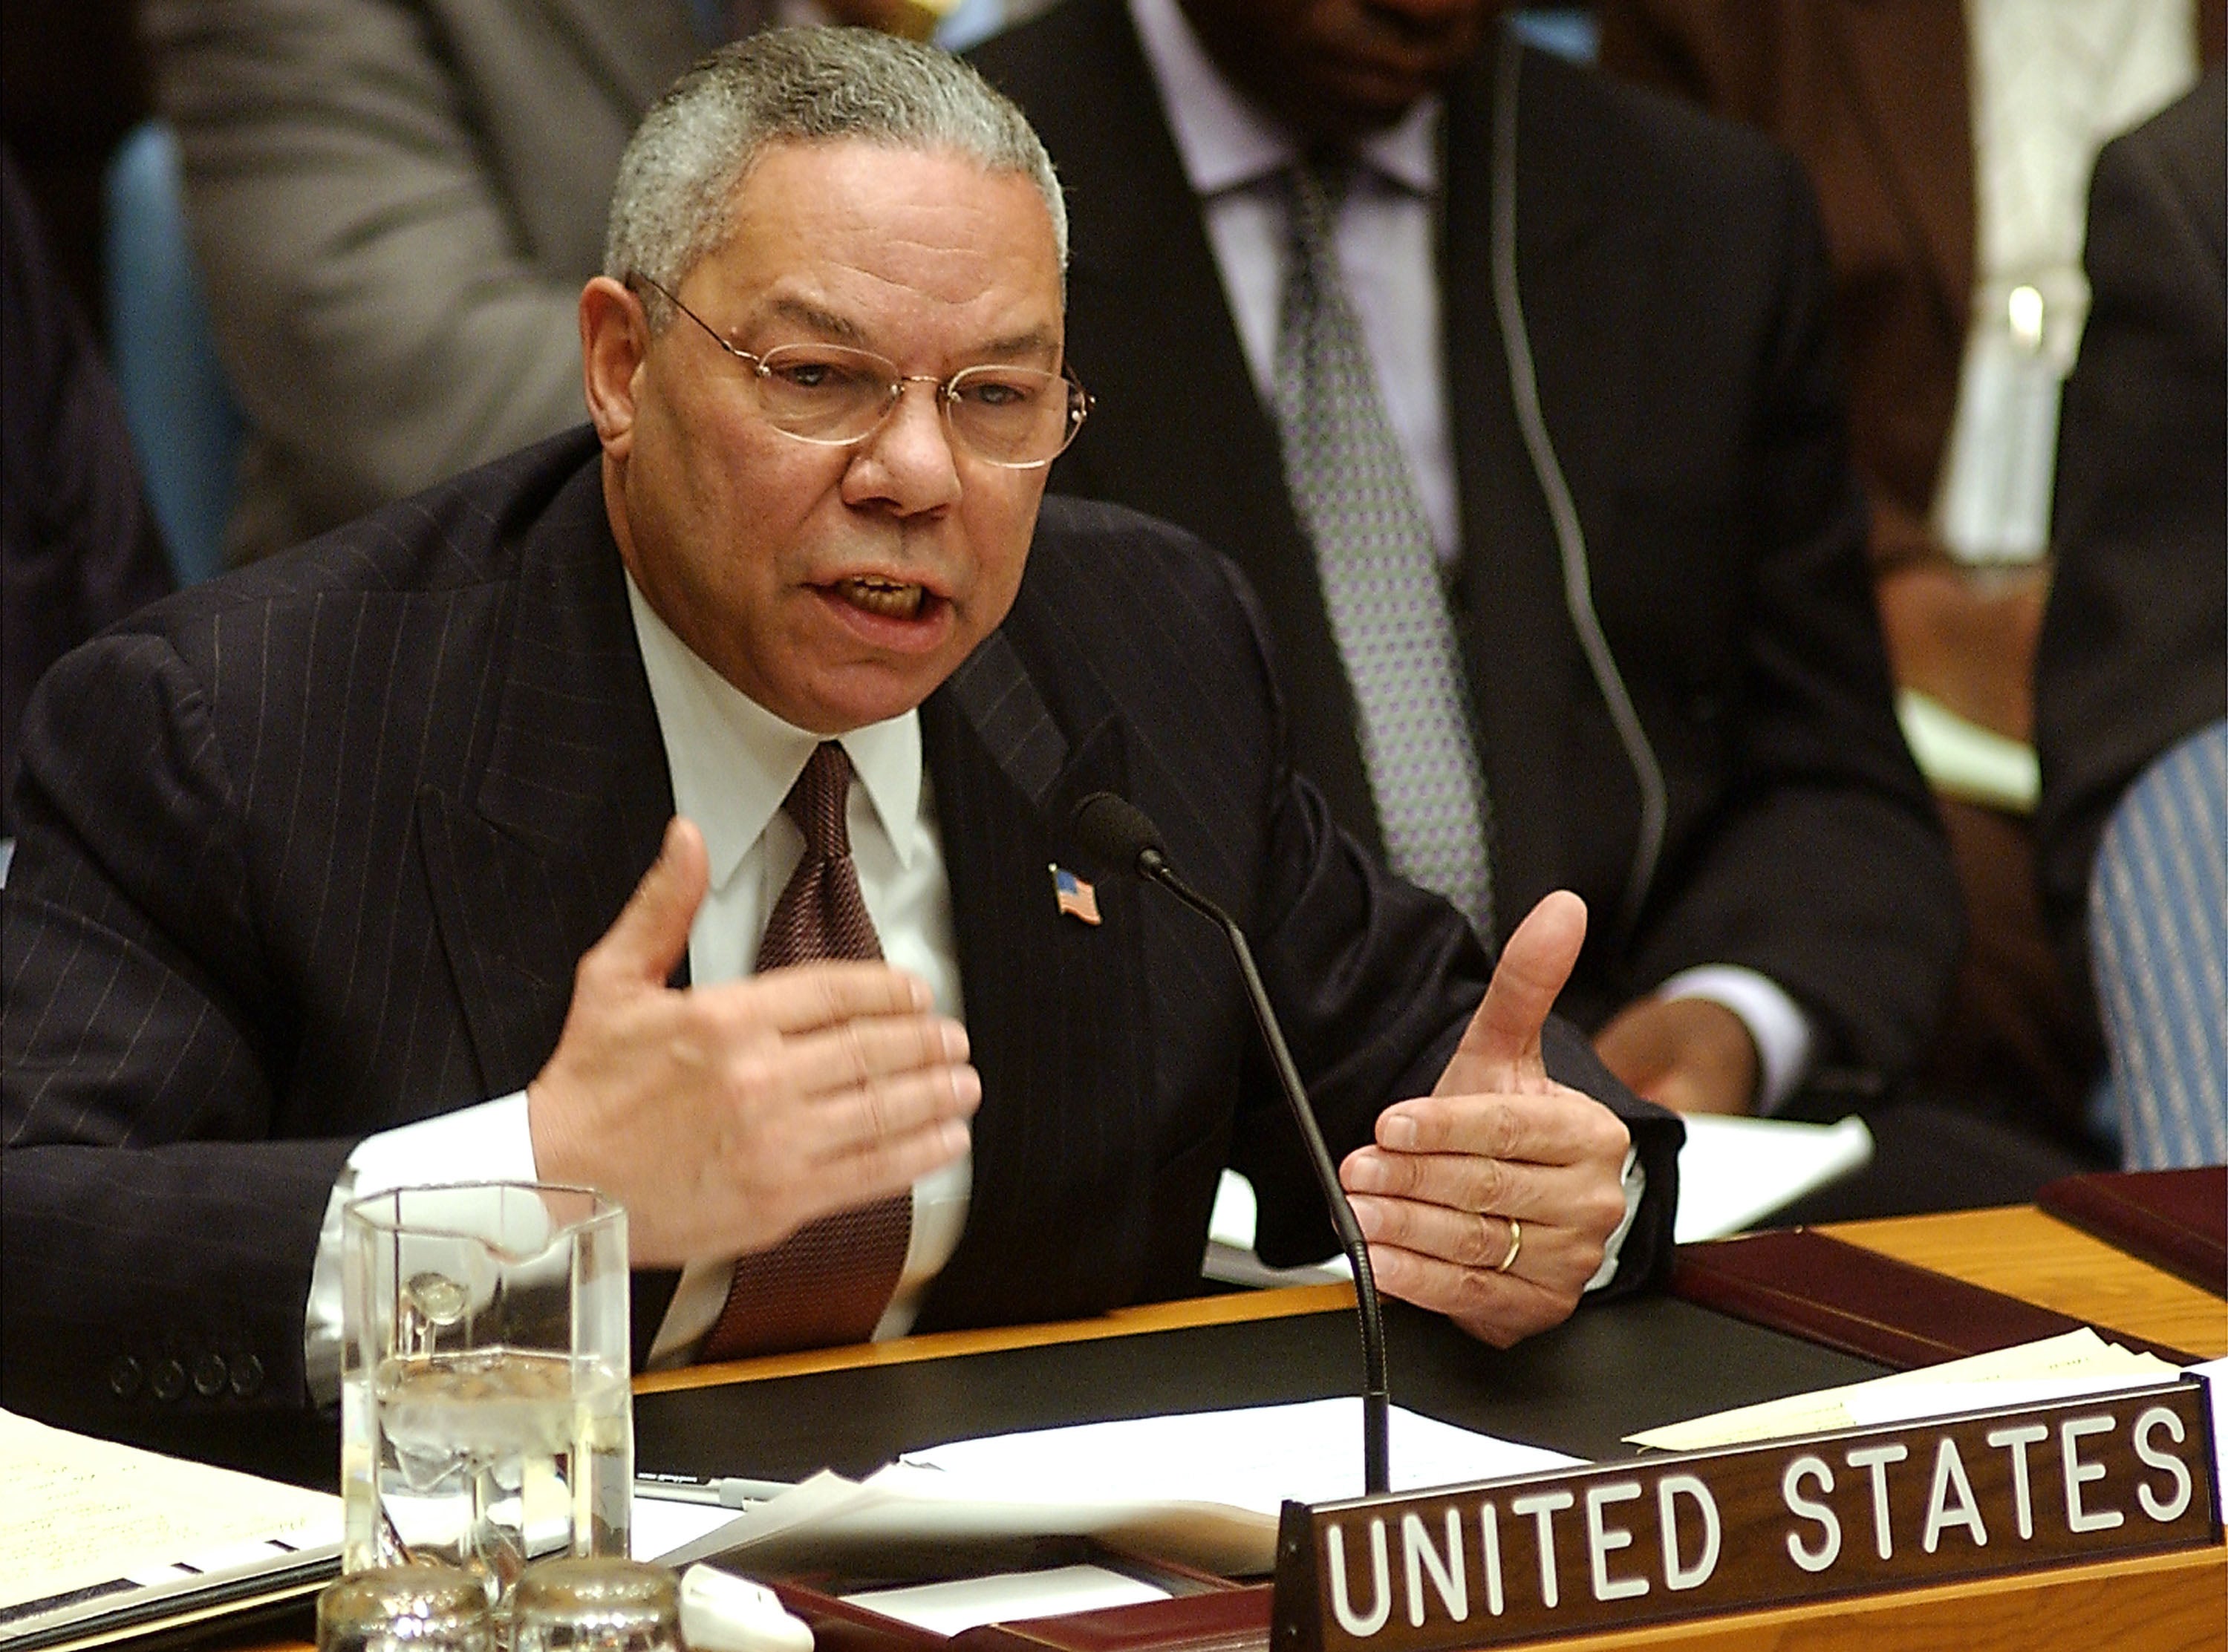 Powell claimed speech to UN result of ‘great intelligence failure’